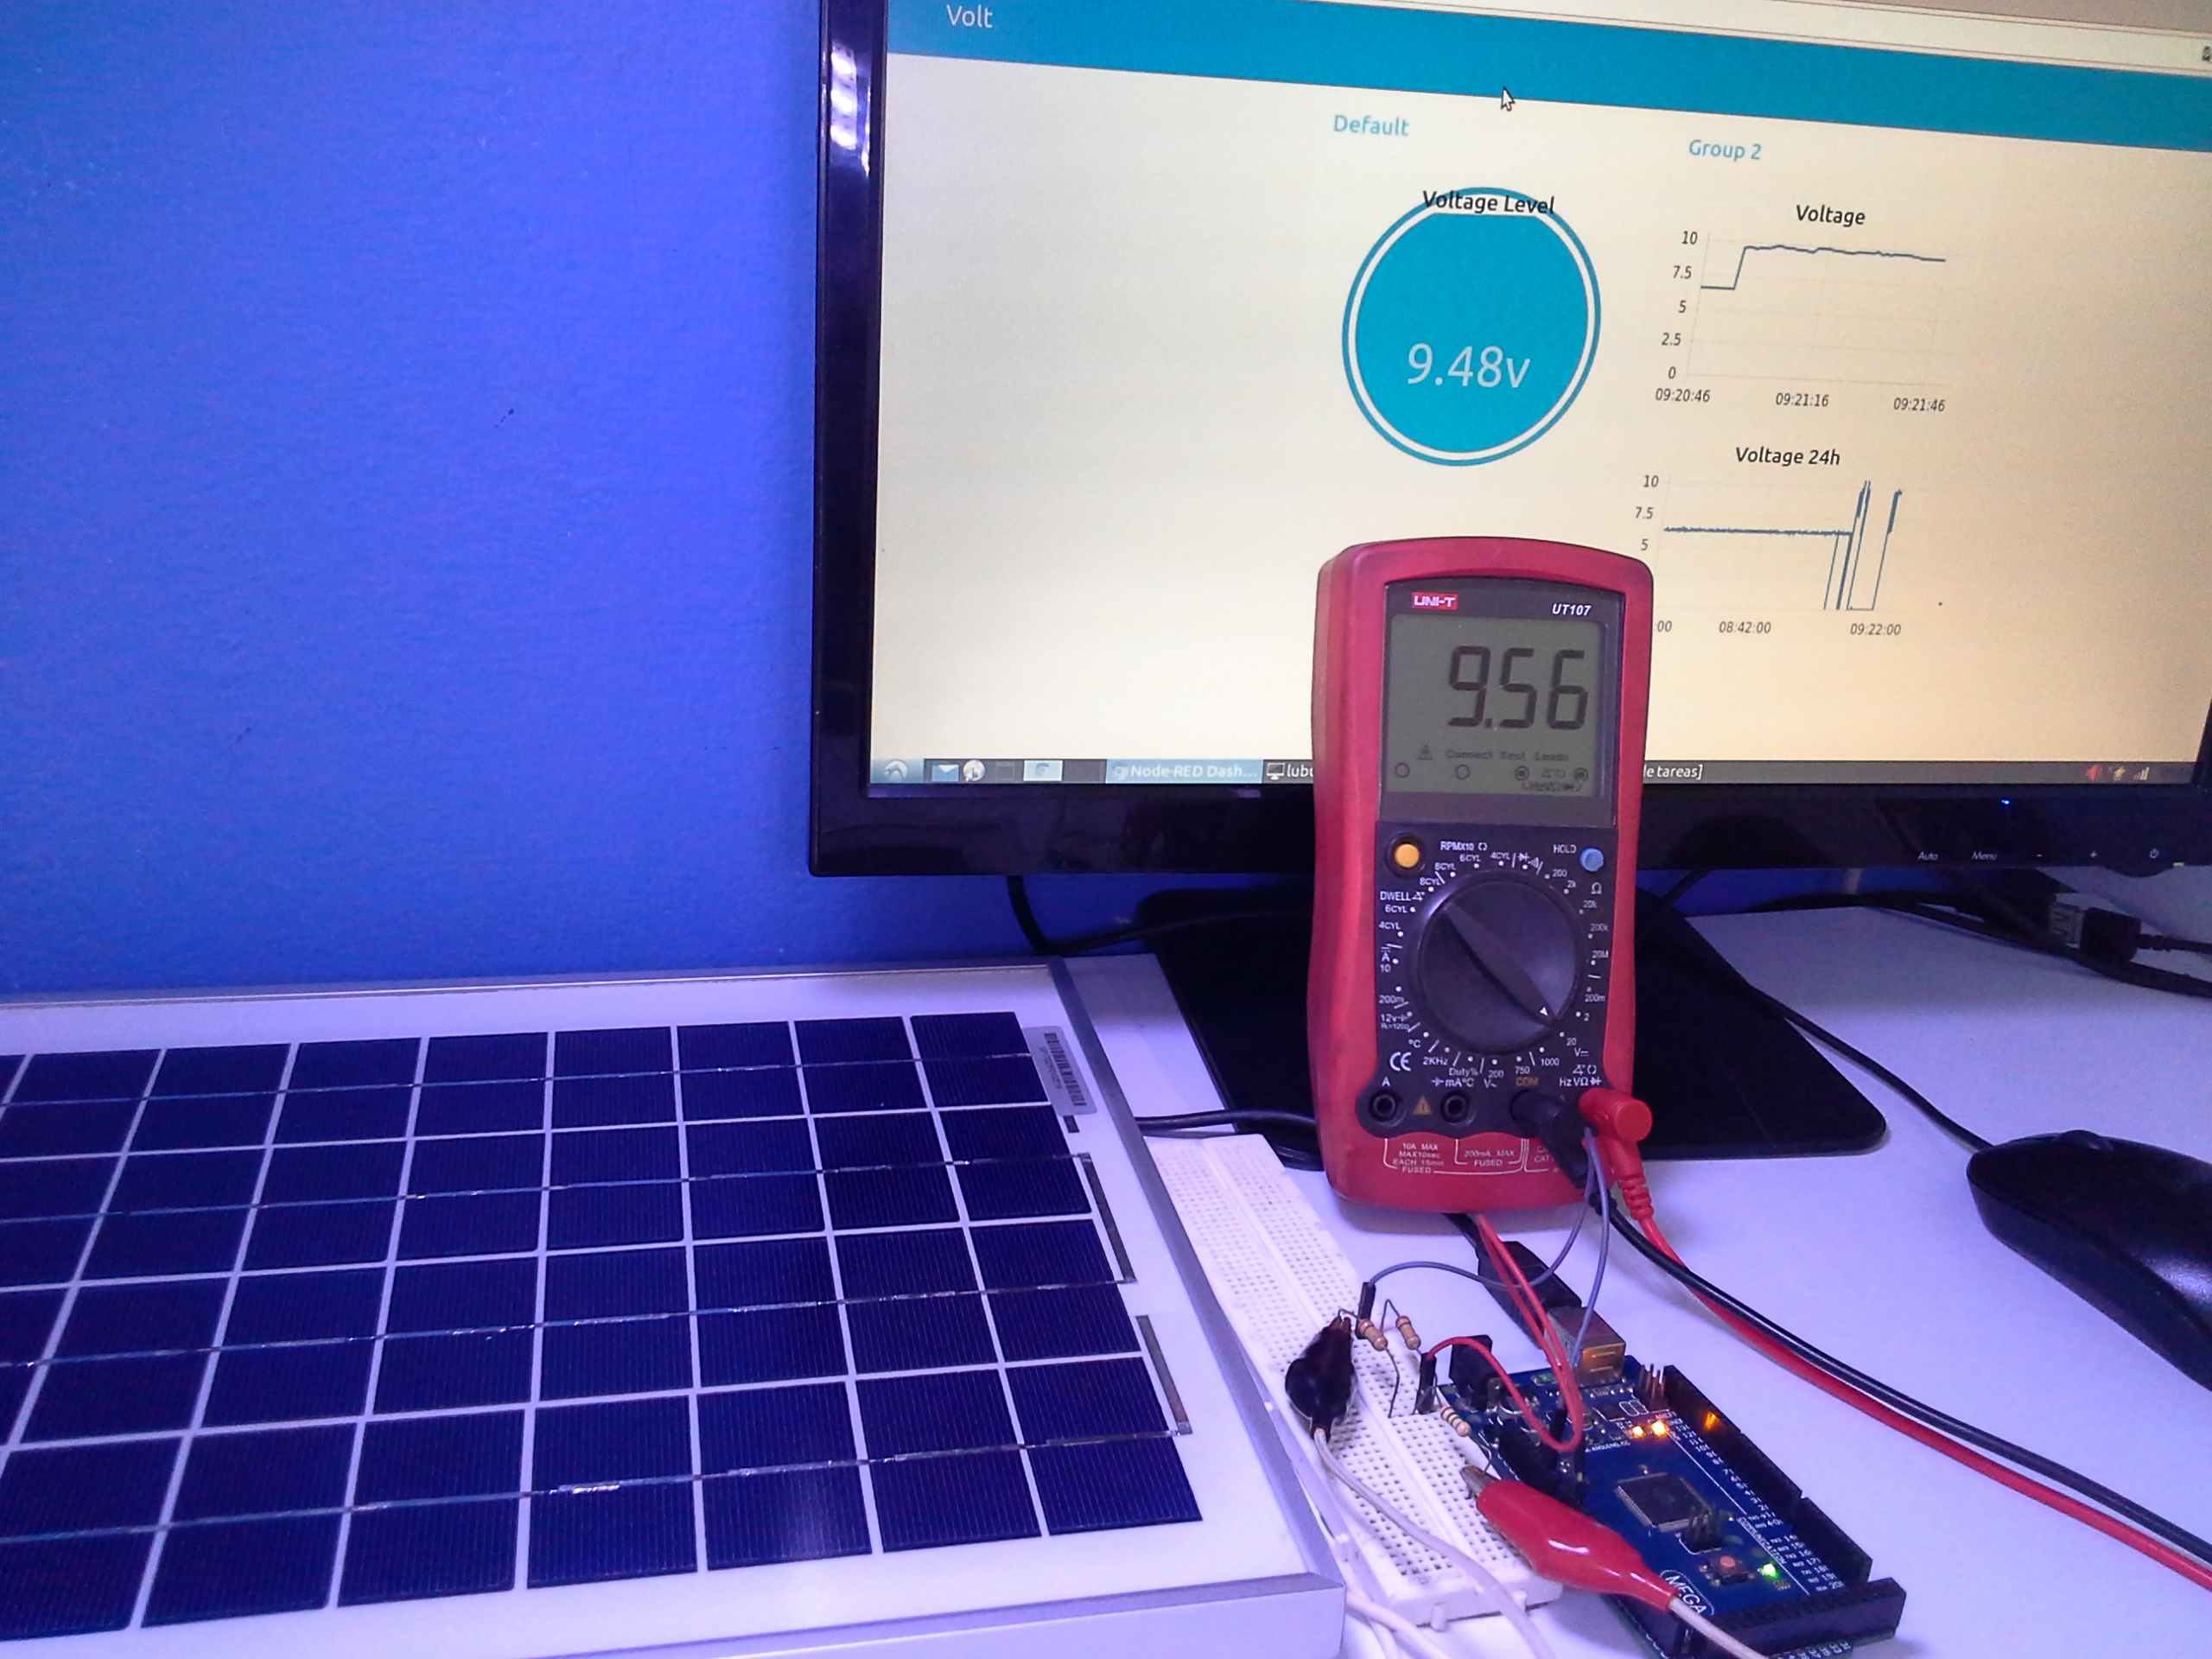 Review Solar Panel 10W with Arduino and NodeRED PDAControl